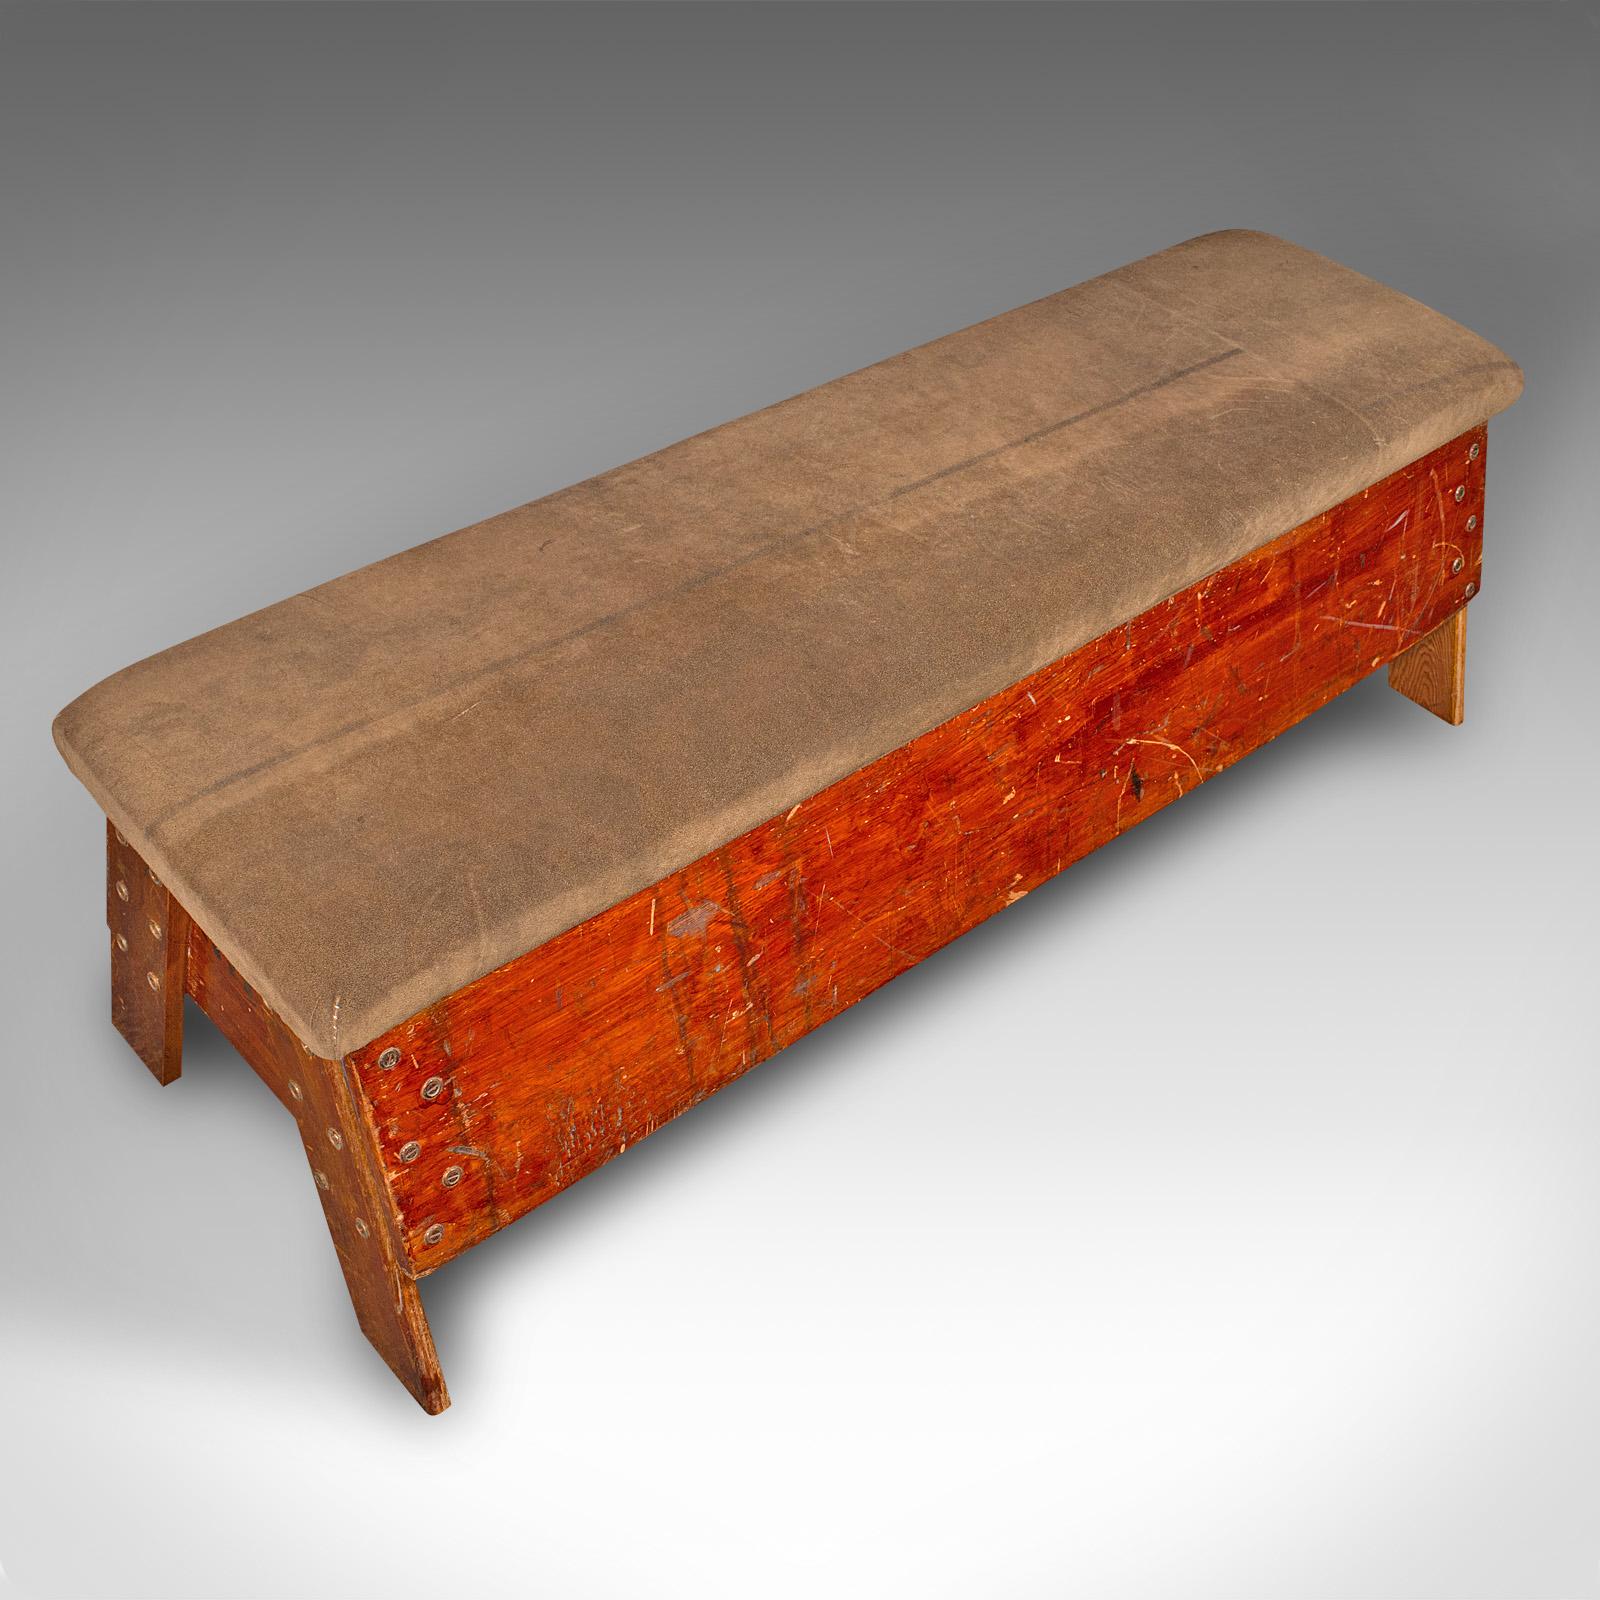 20th Century Vintage Gymnasium Bench, English, Pine, Suede, Window Seat, Dining Room, C.1930 For Sale